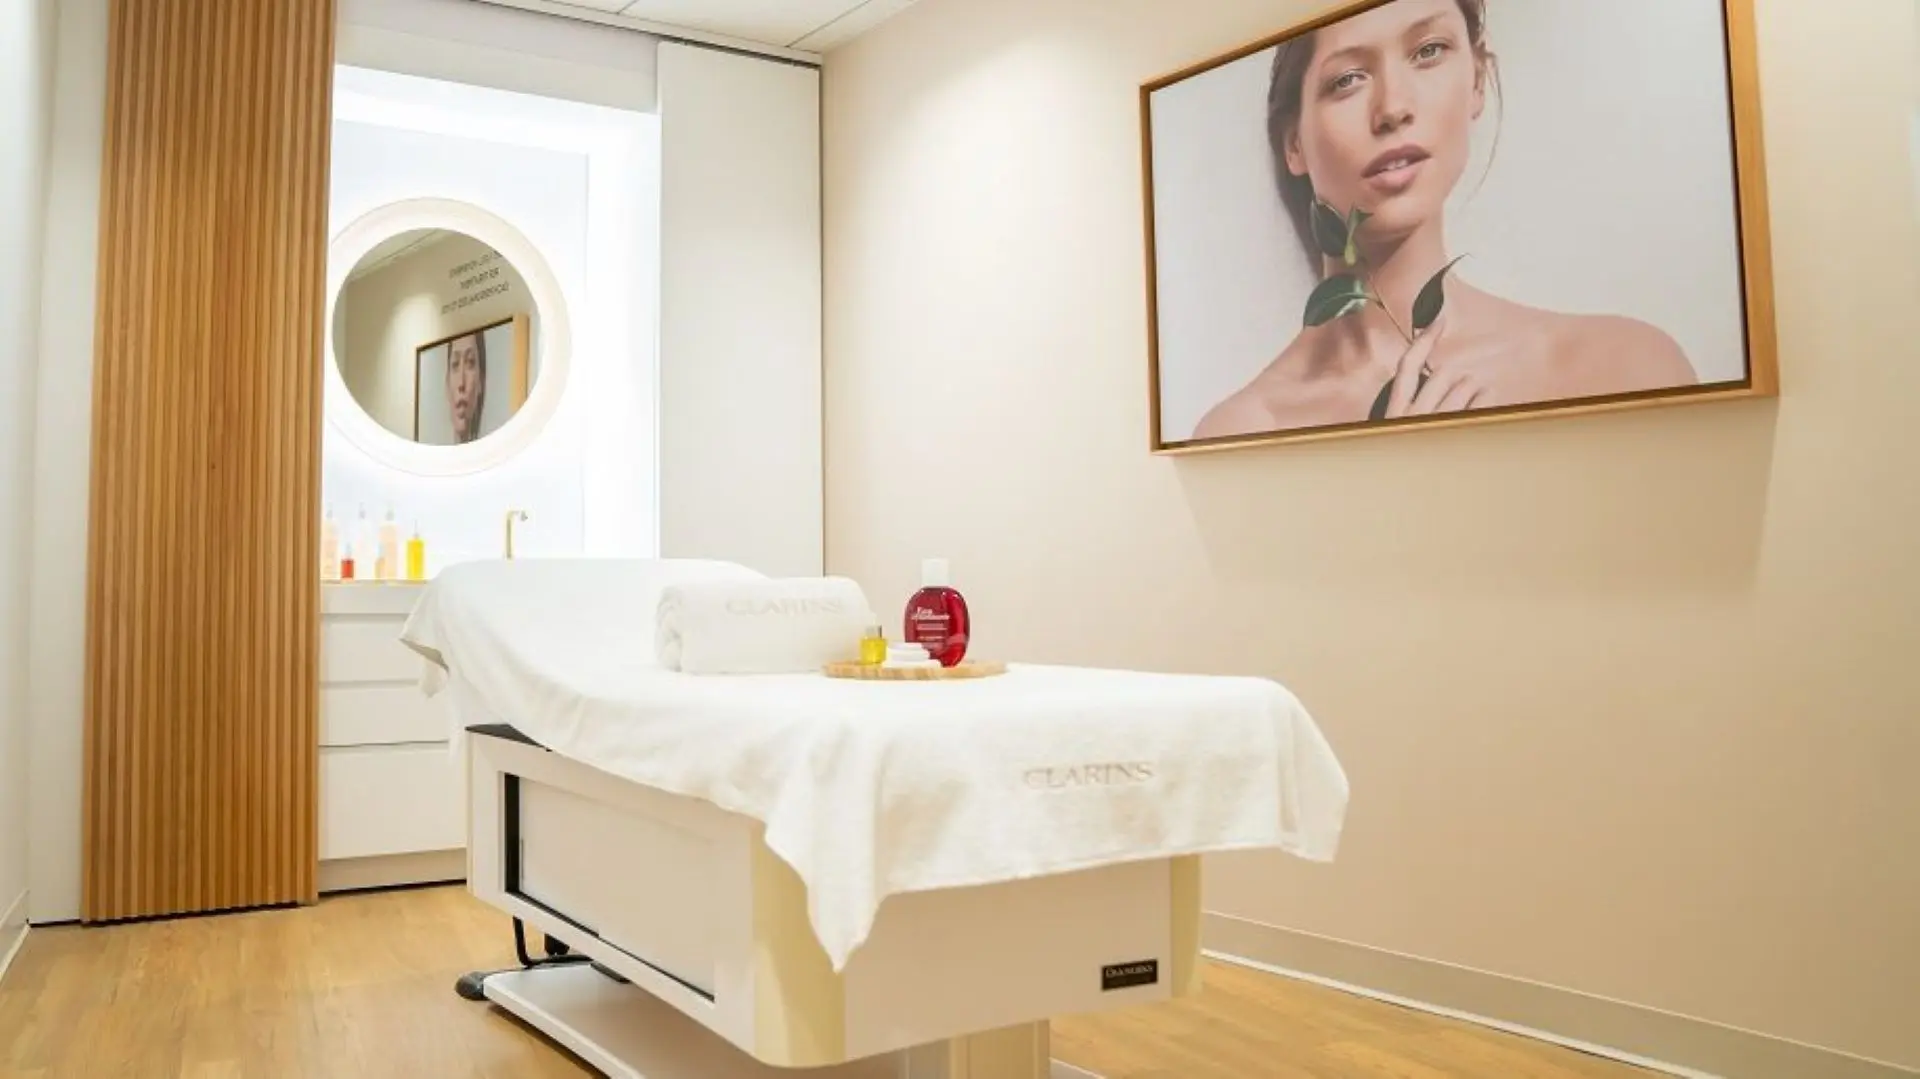 Airlines News - Air France opens Clarins Spa in New York – JFK Lounge 